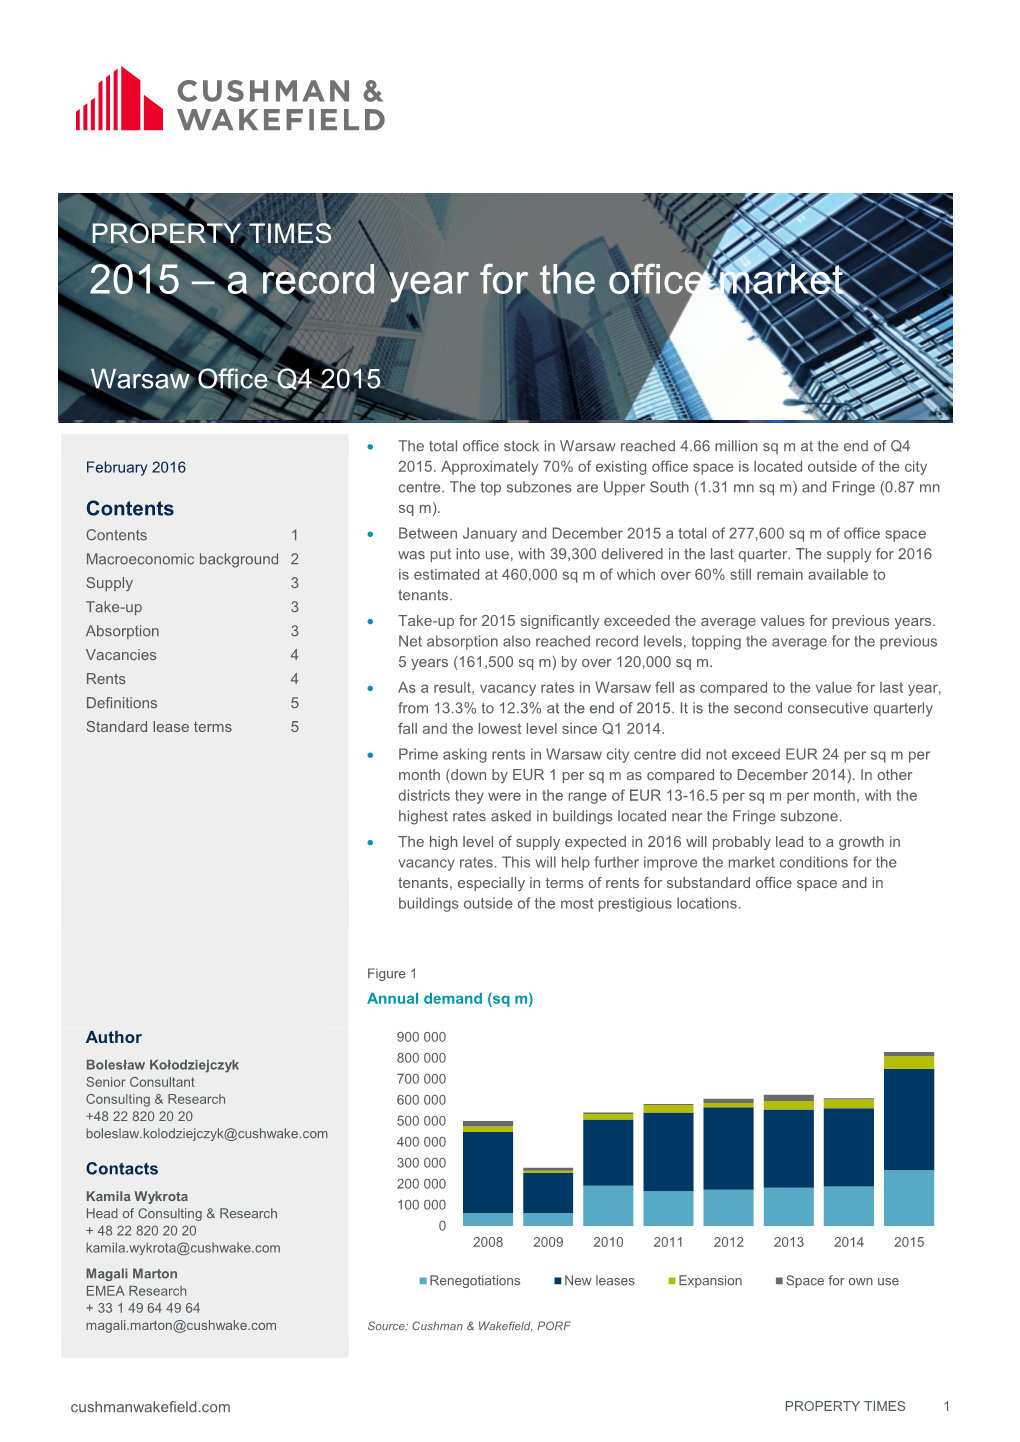 Property Times: 2015 – a Record Year for the Office Market